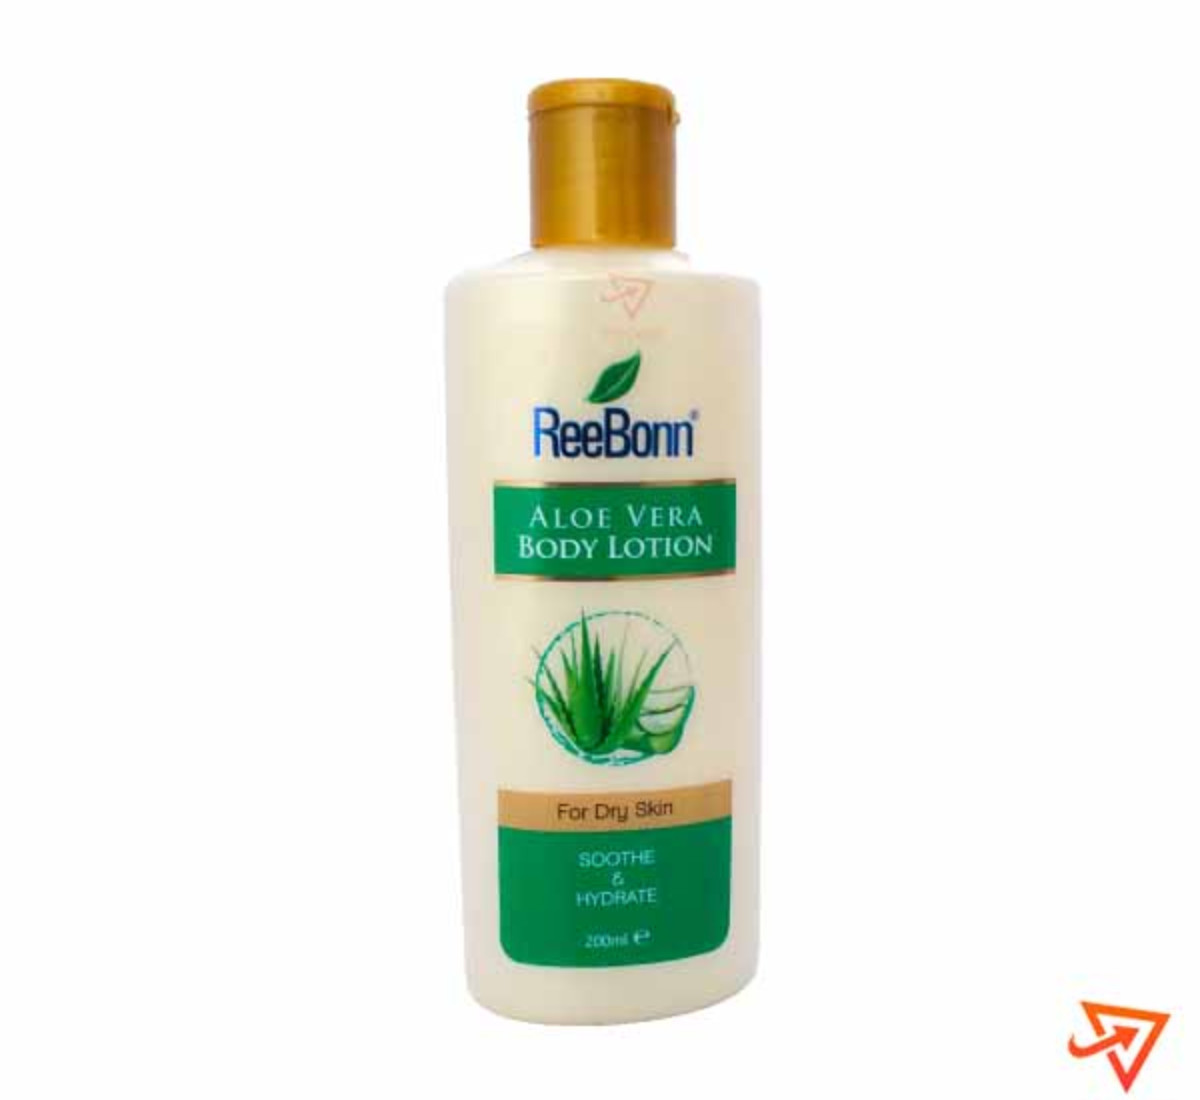 Clicker product 200ml REEBONN Aloevera body lotion soothe hydrate 1030